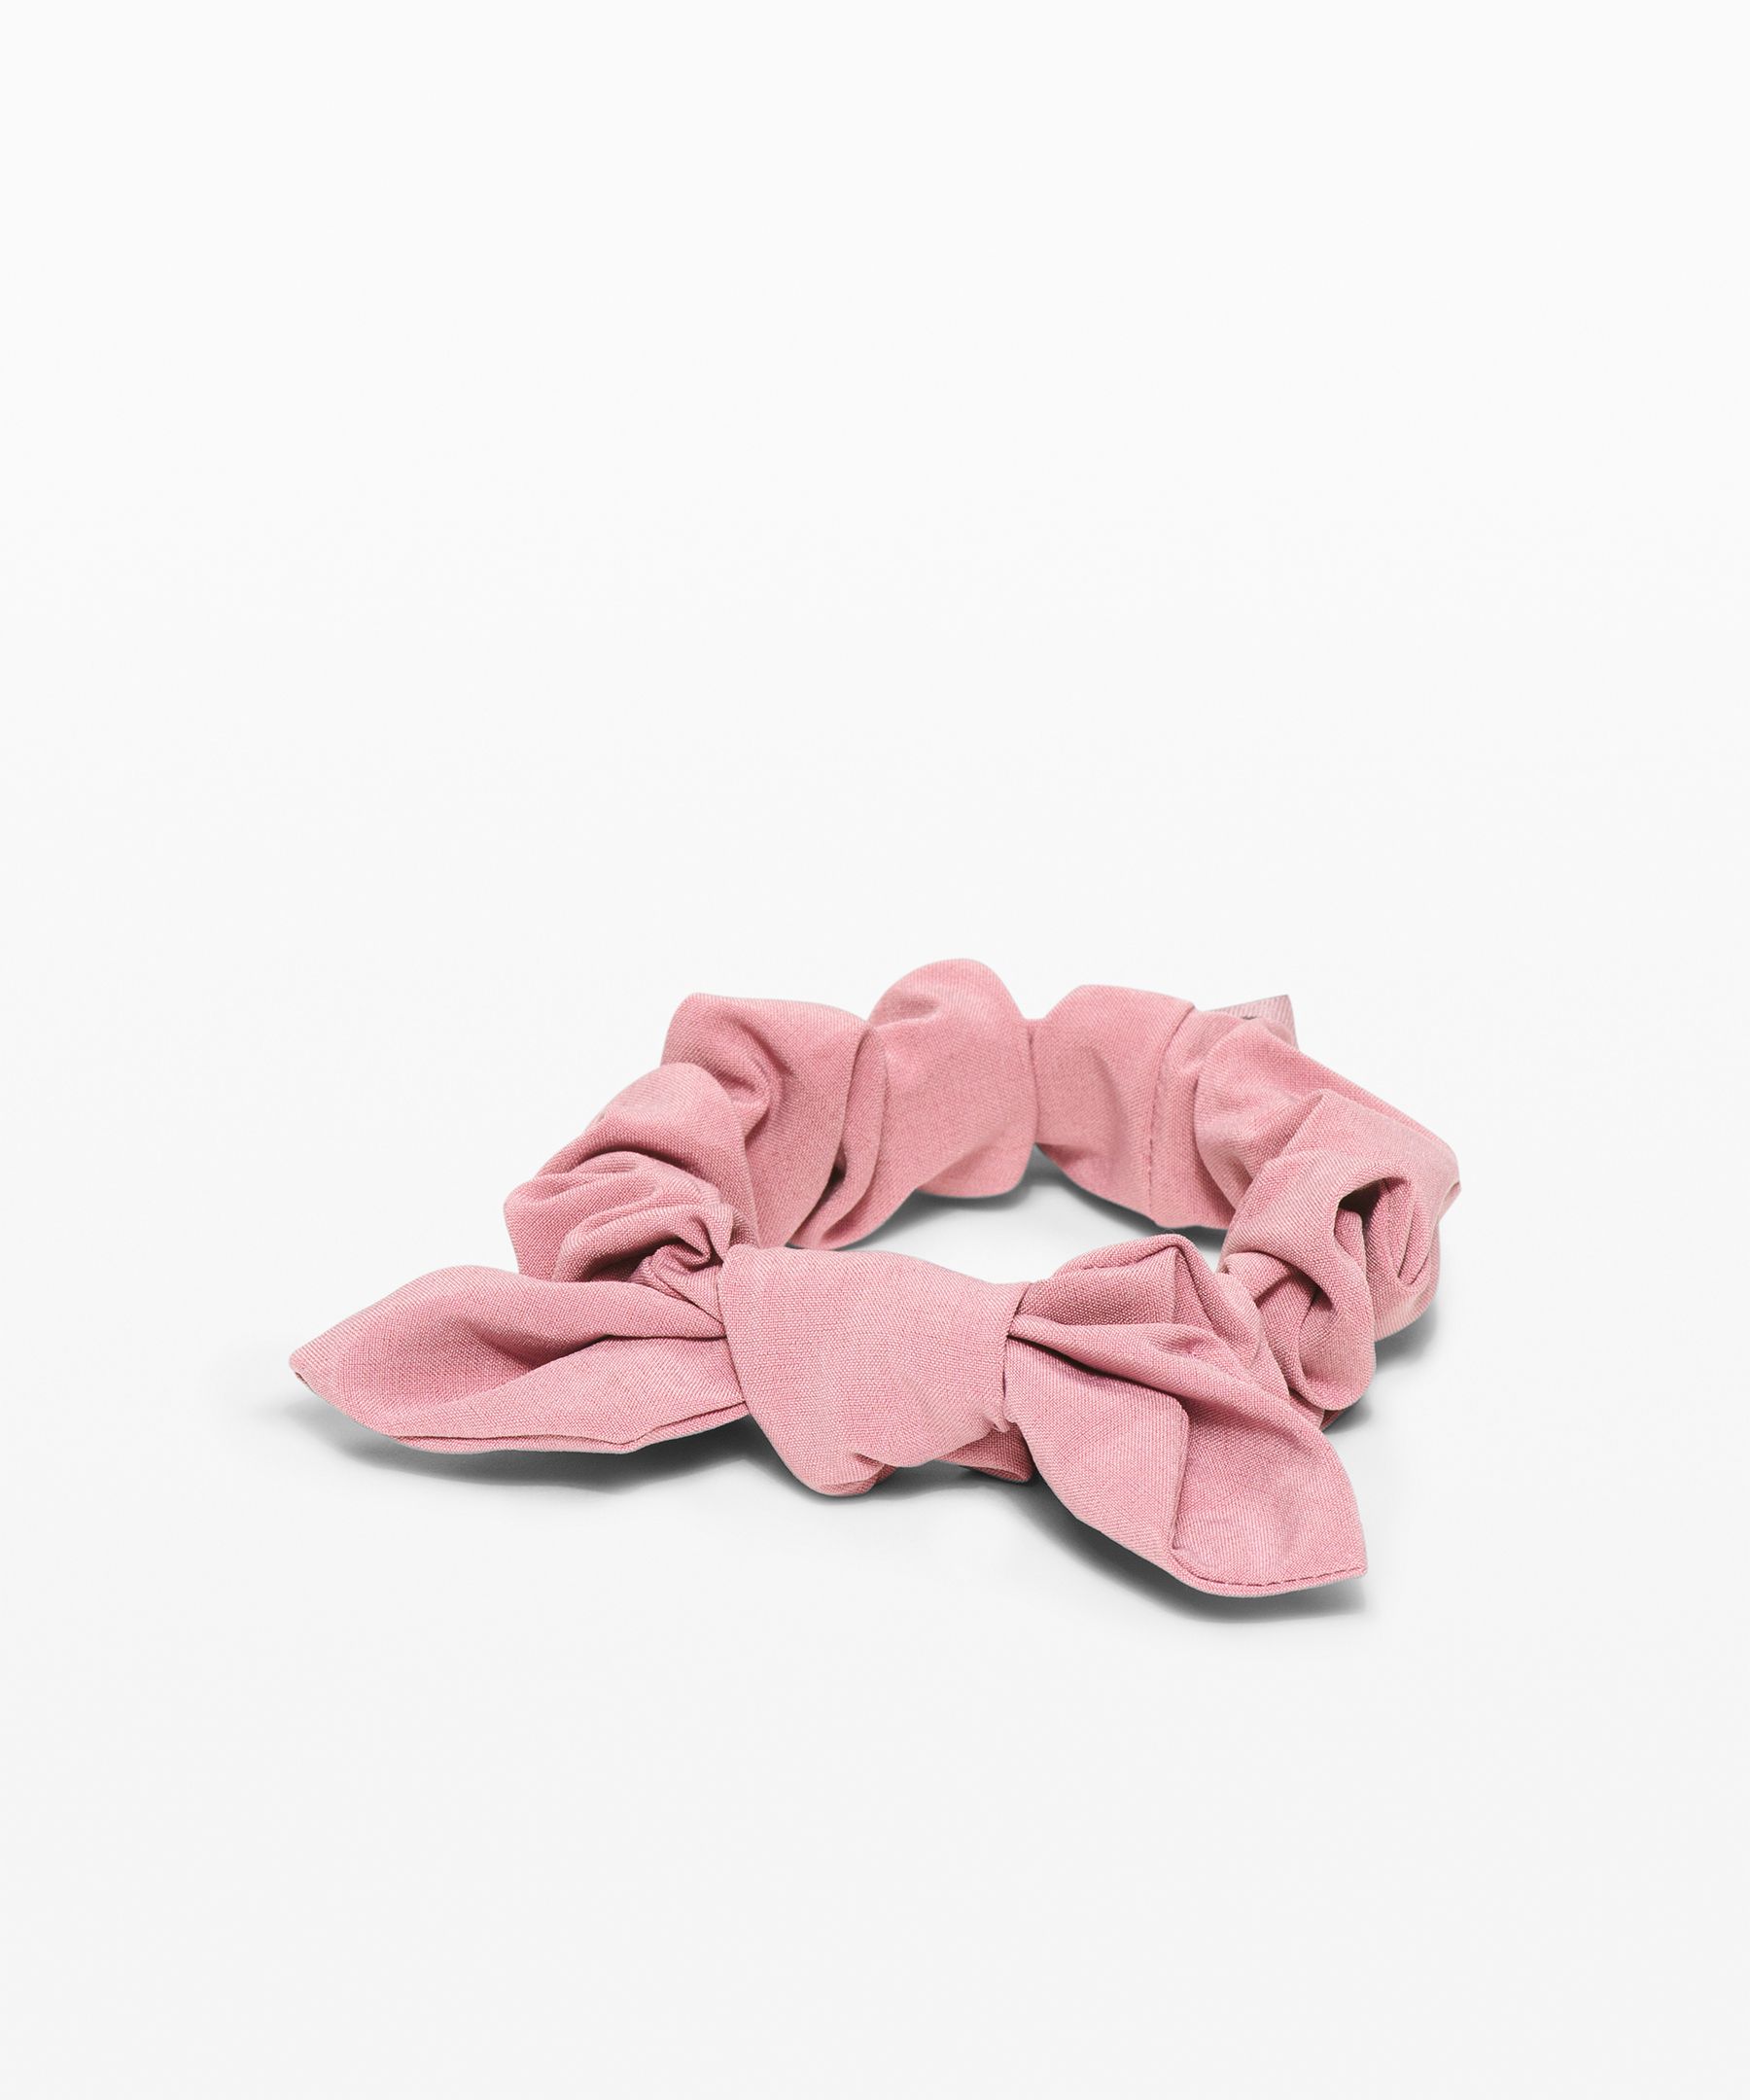 Lululemon Uplifting Scrunchie Bow In Pink Taupe